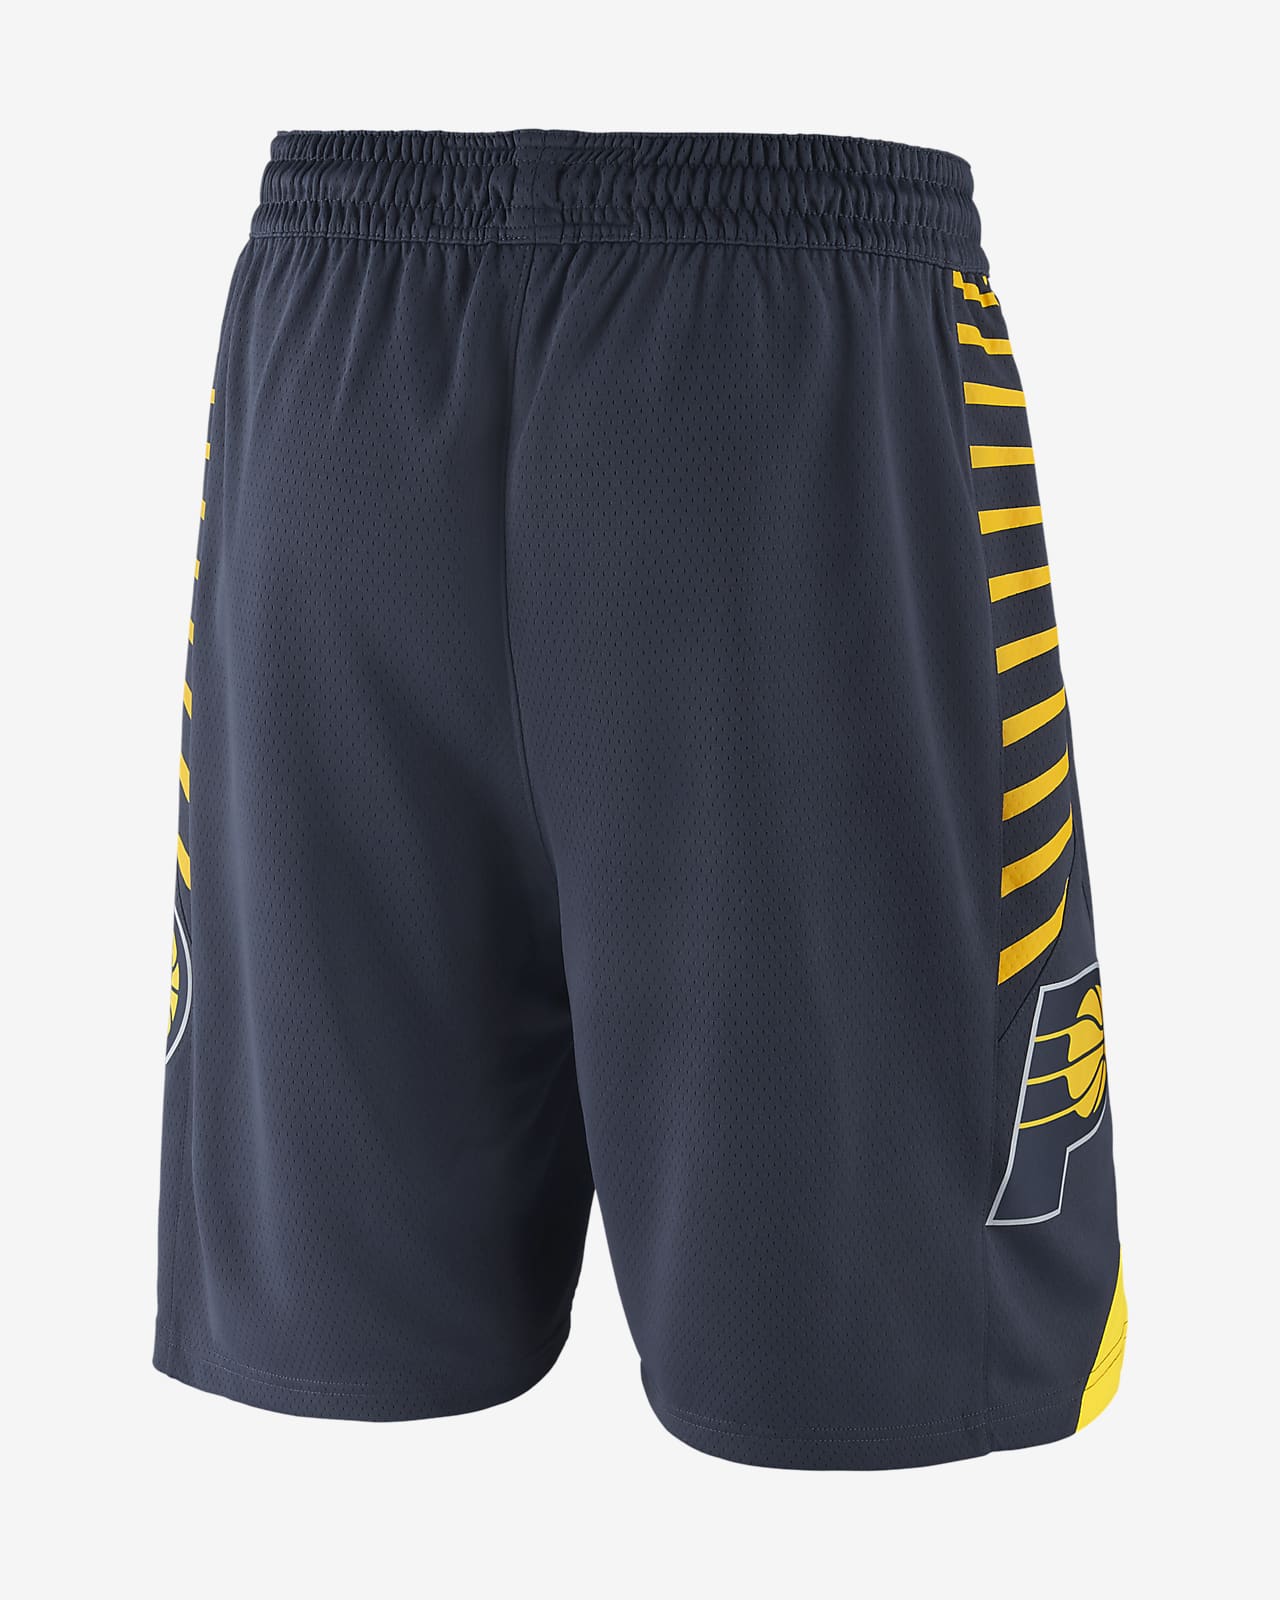 Indiana Pacers Gear & Apparel